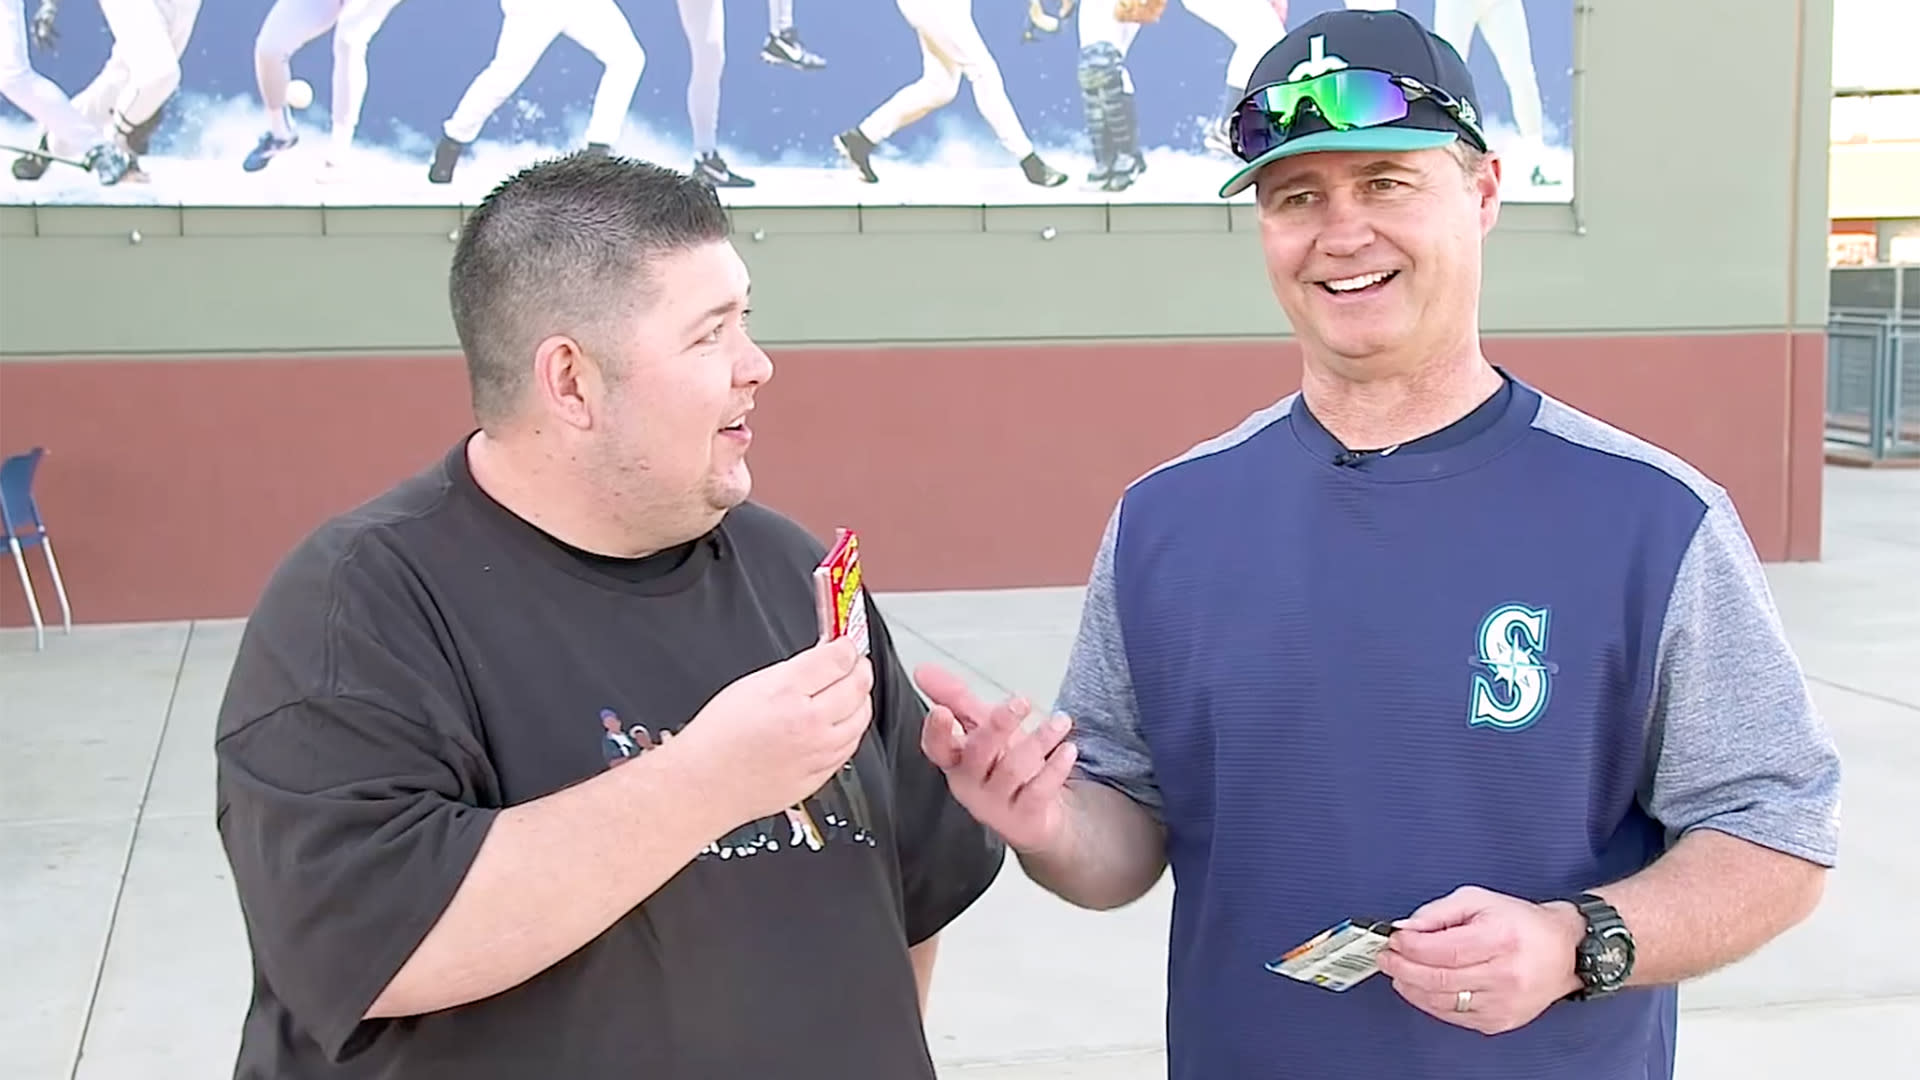 Mariners manager Scott Servais loves the teammates, hates the gum